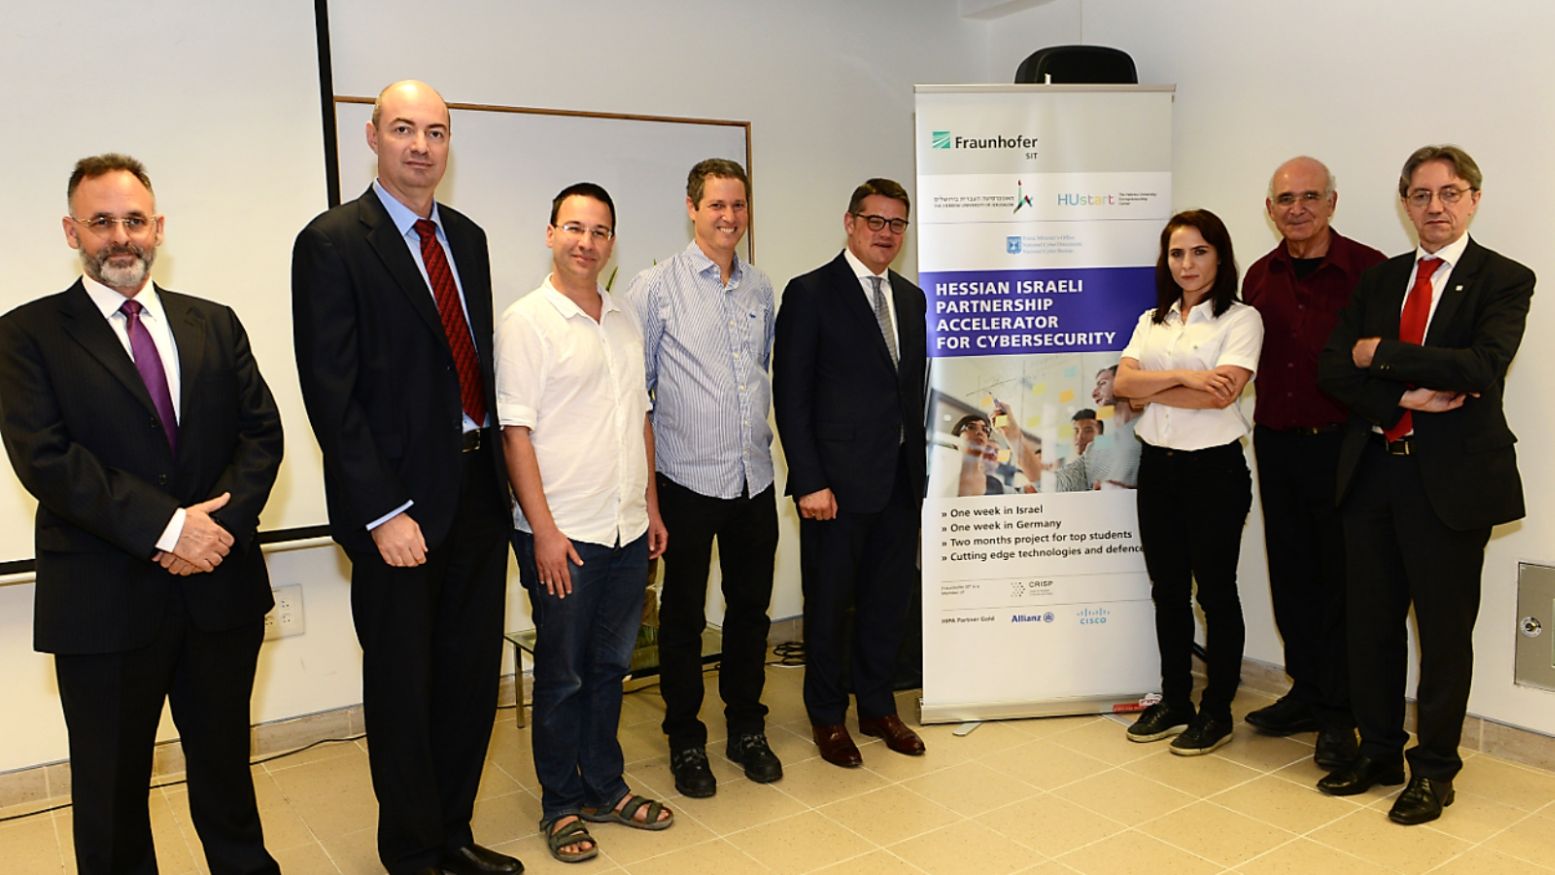 From left, Iddo Moed, Cybersecurity Coordinator, Israeli Ministry of Foreign Affairs; Yigal Unna, Head of Cybersecurity Technology Unit, Israeli National Cybersecurity Directorate; Prof. Michael Schapira, School of Computer Science and Engineering, Hebrew University; Prof. Yair Weiss, Dean, School of Computer Science and Engineering, Hebrew University; Boris Rhein, Hessian Ministry of Higher Education, Research and the Arts, Germany; Dr. Haya Shulman, Department Director, Fraunhofer SIT, Germany; Prof. Danny Dolev, Head of the Cybersecurity Center, School of Computer Science and Engineering, Hebrew University; Prof. Michael Waidner, Director of Fraunhofer SIT, Germany. Photo: courtesy